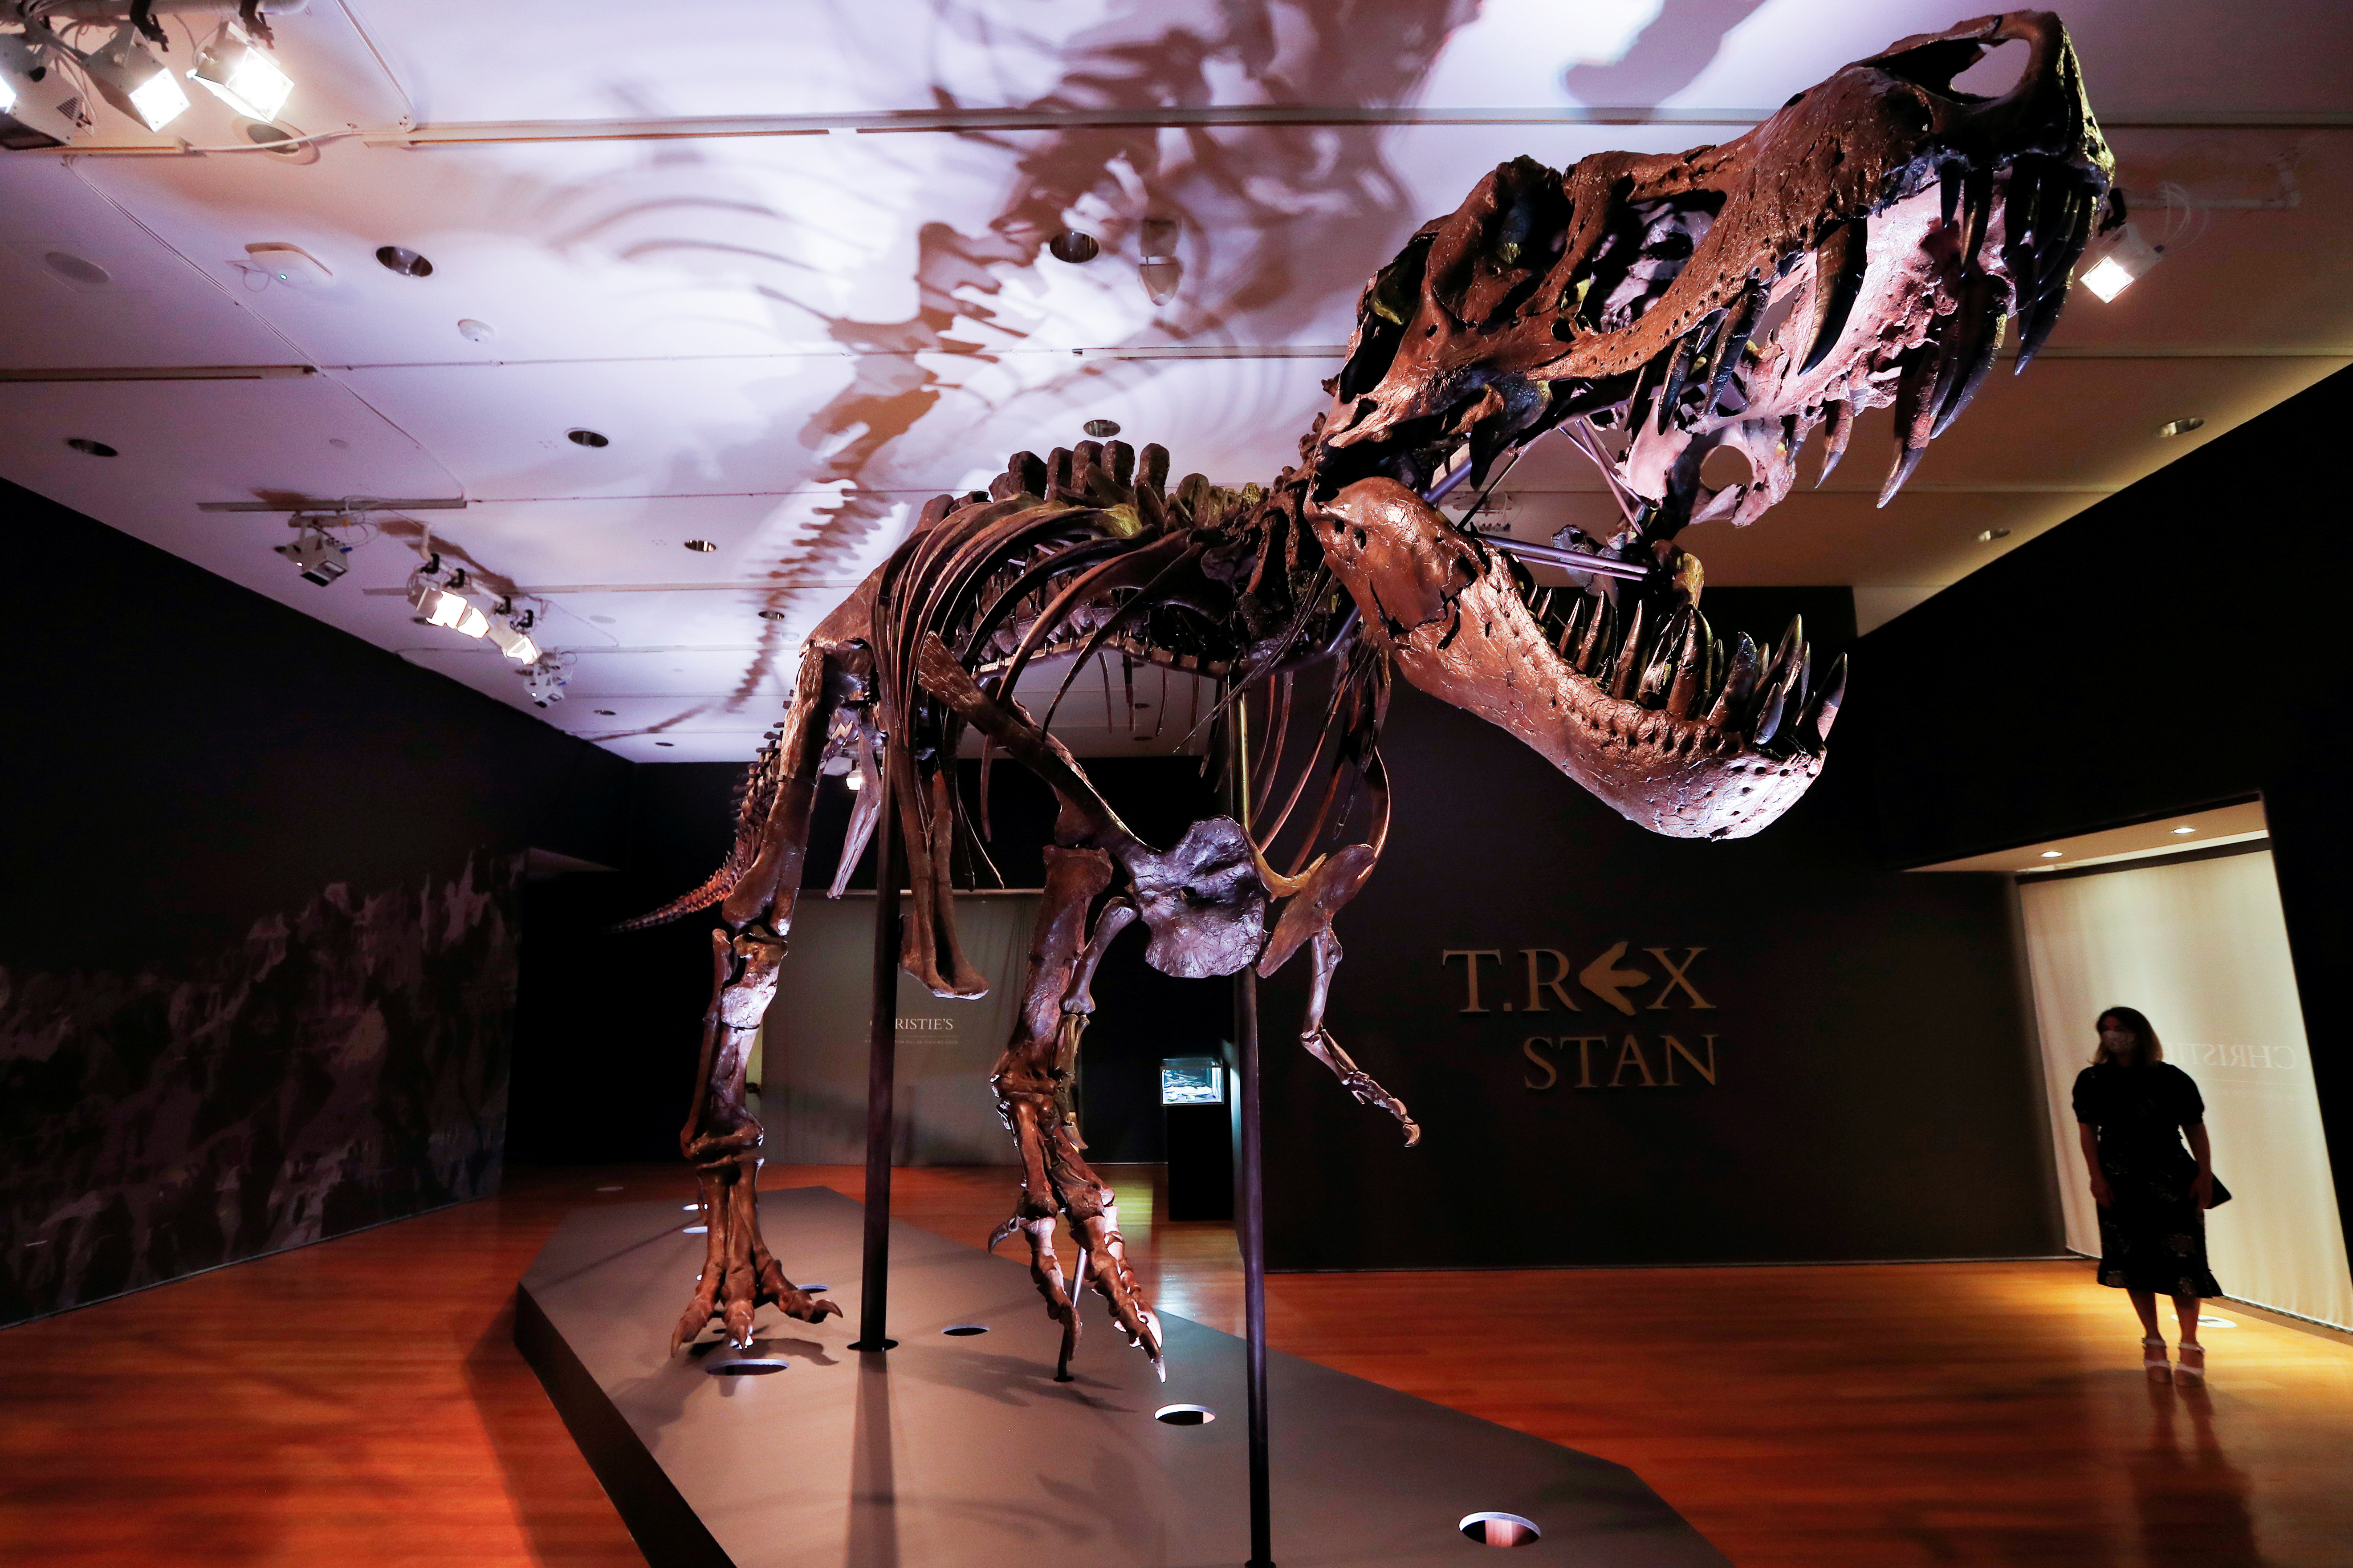 An approximately 67 million-year-old Tyrannosaurus rex skeleton, one of the largest, most complete ever discovered and named 